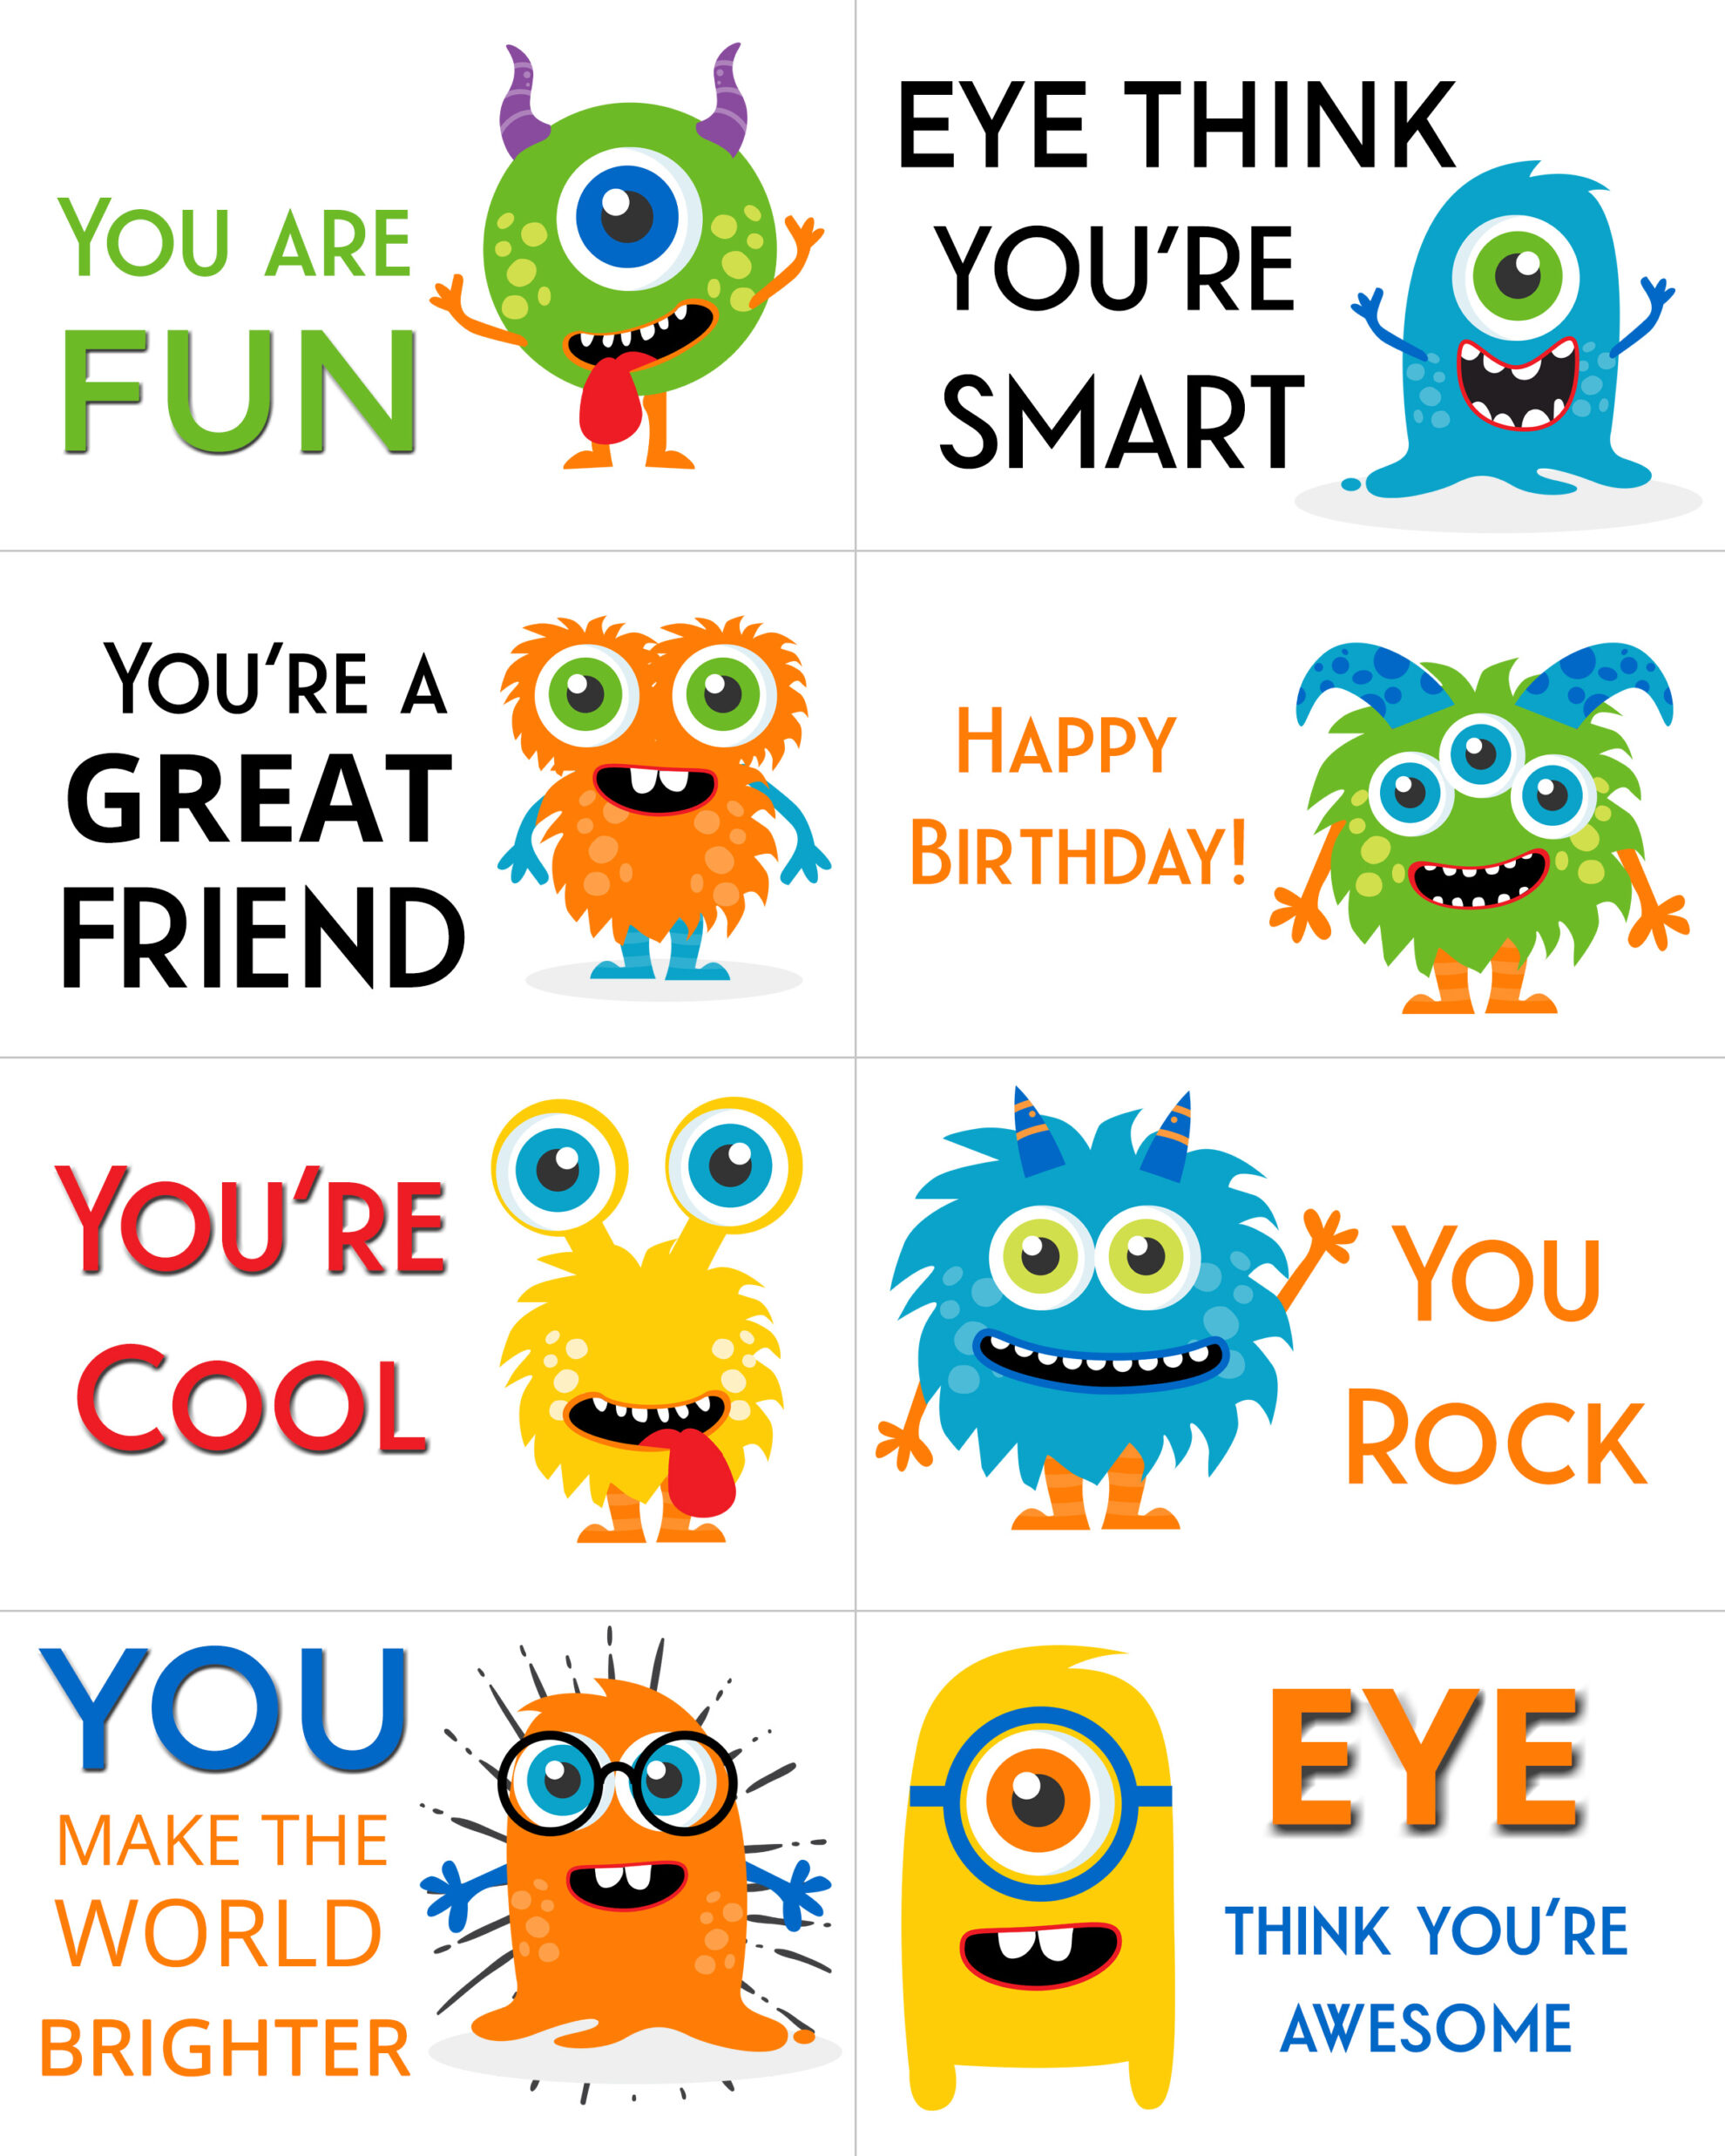 Show you care with these free printable adorable monster lunch box message notes perfect for your little ones school lunches!